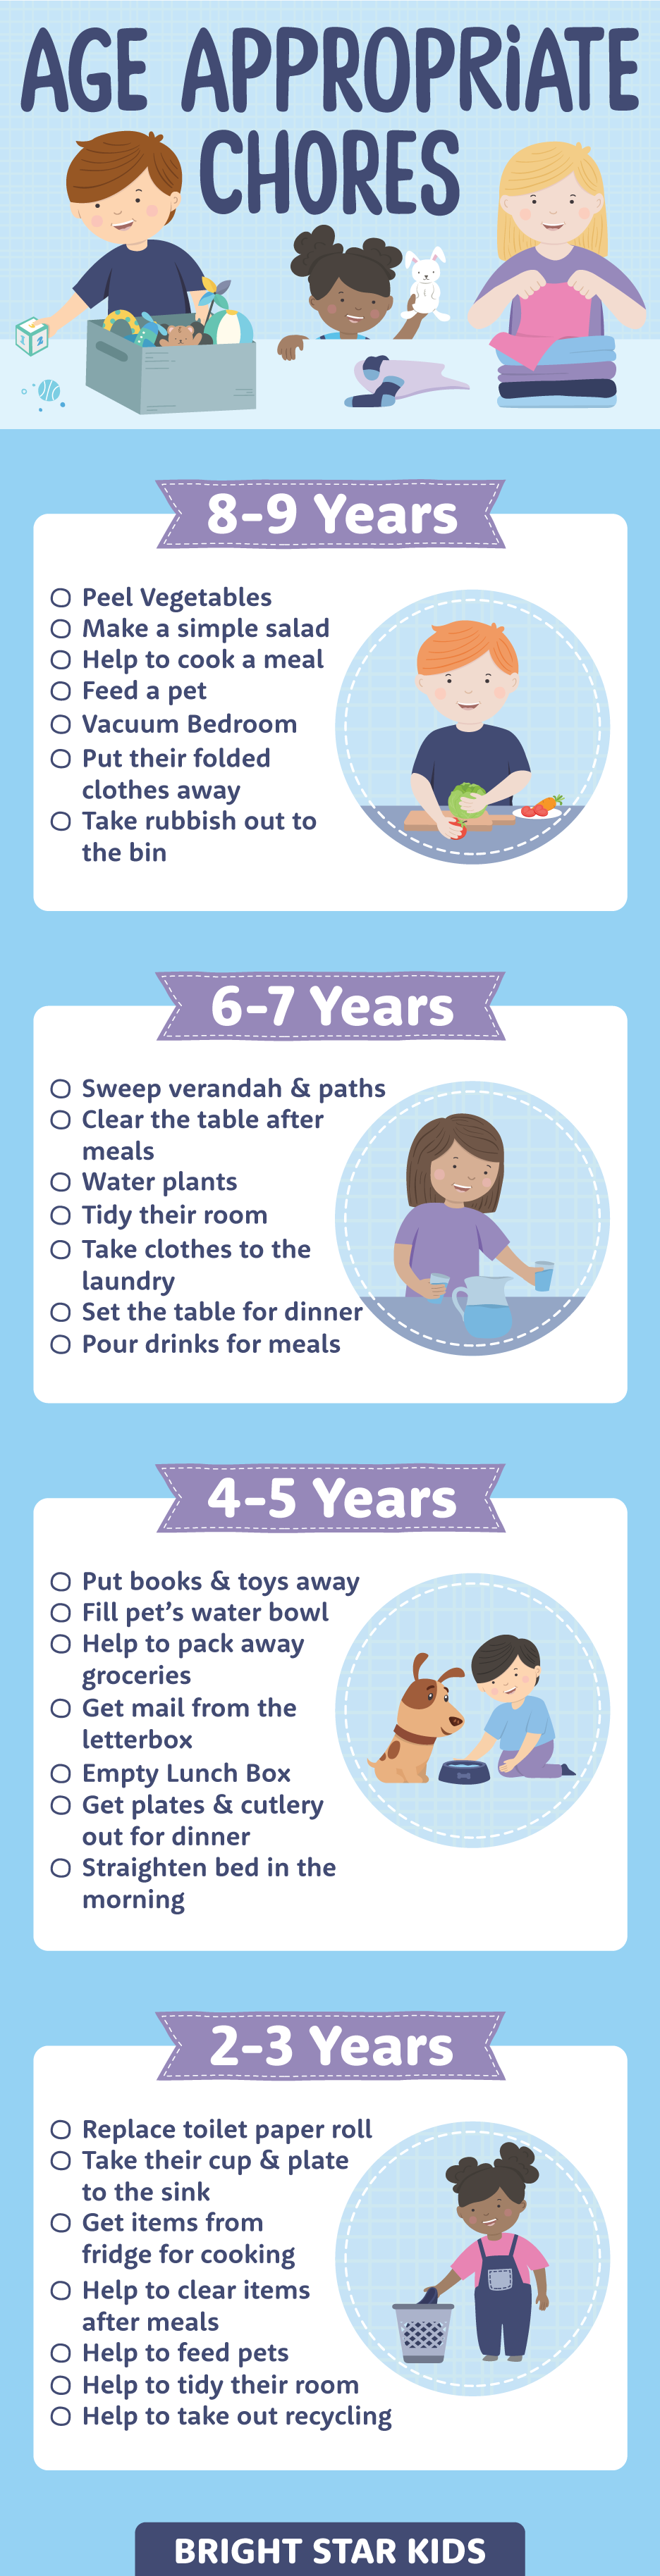 Age Appropriate Chores for Kids